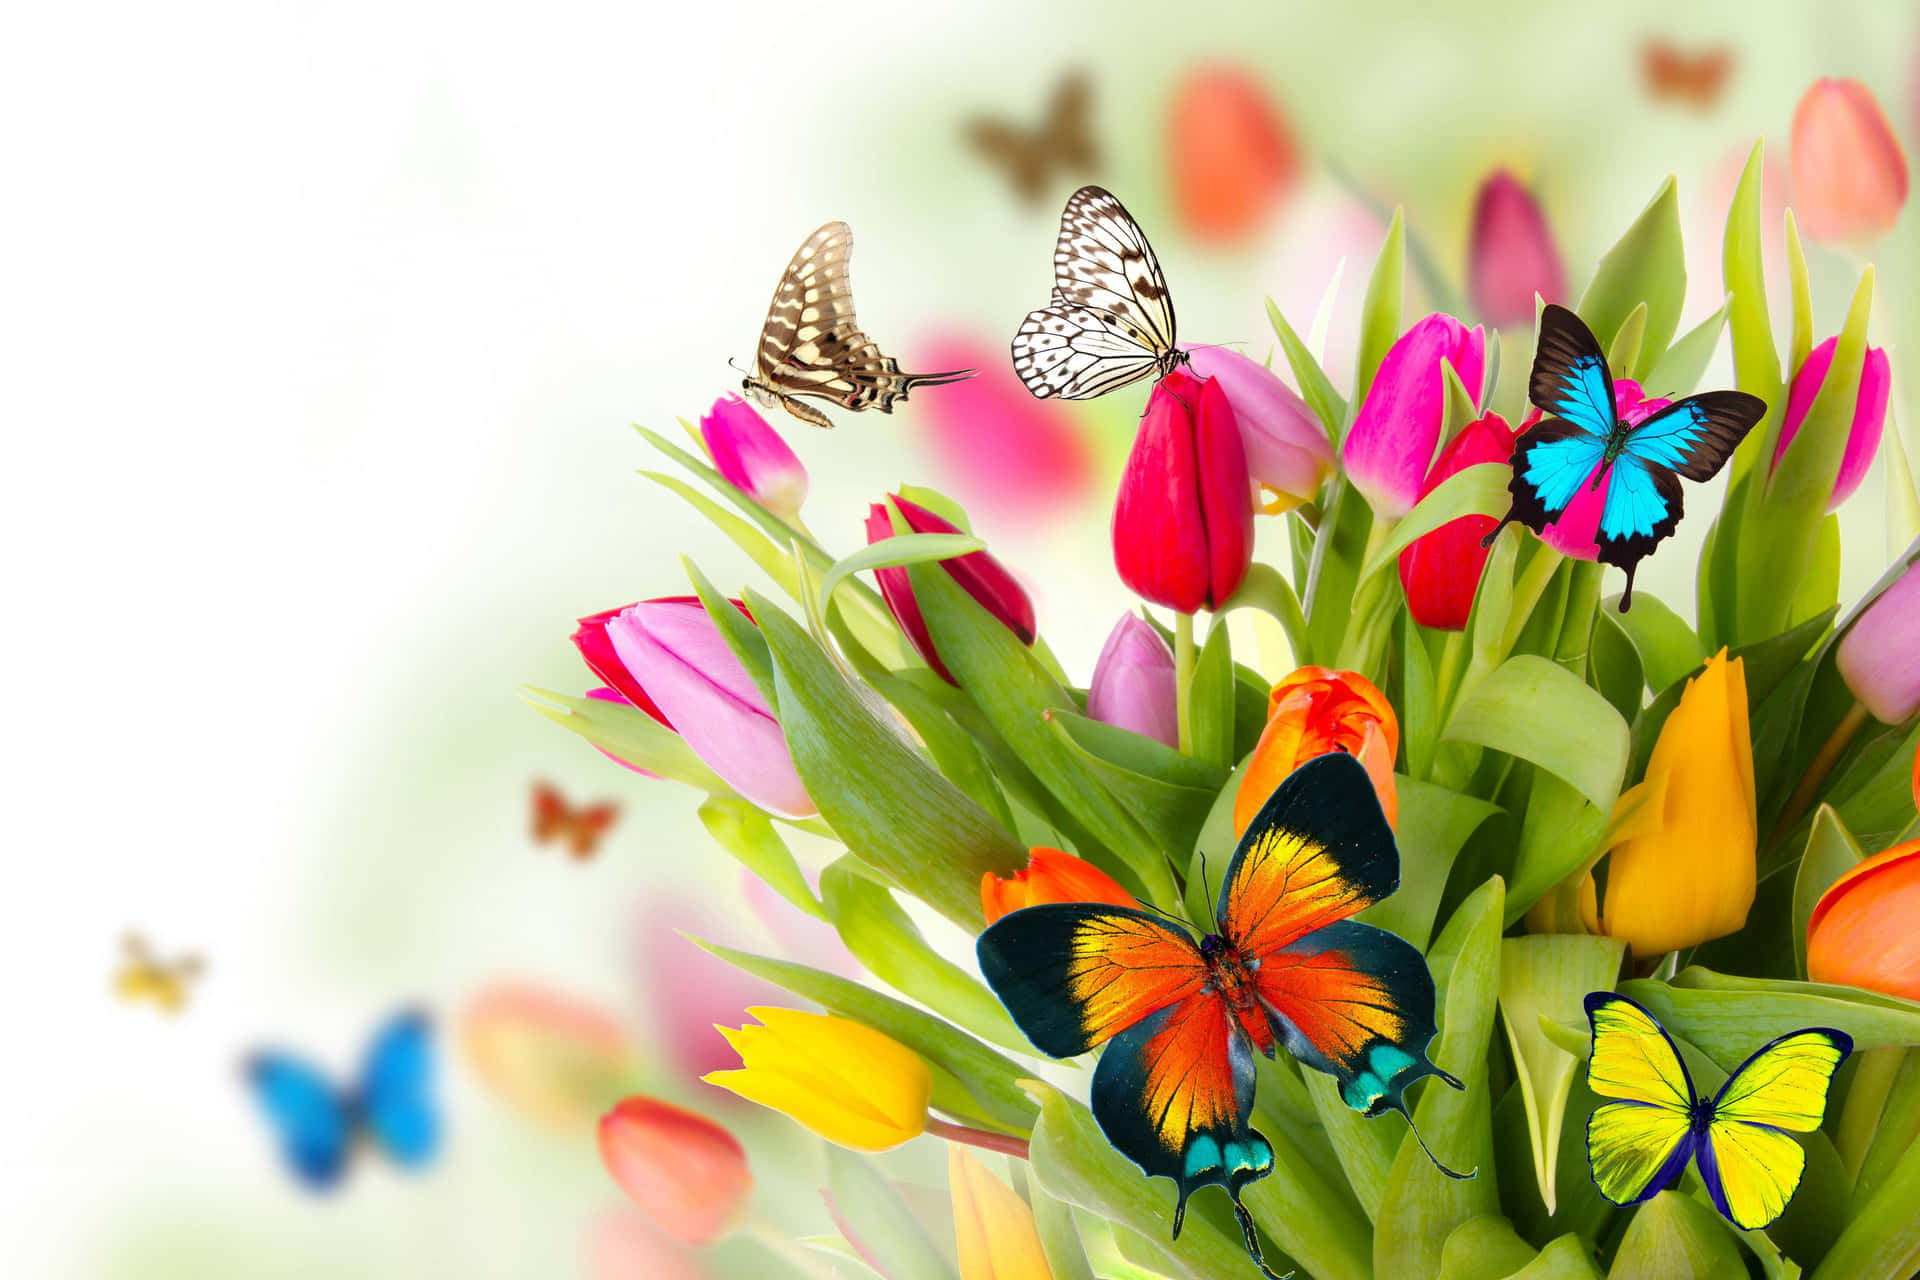 Enjoy the beauty of Spring with these colorful flowers